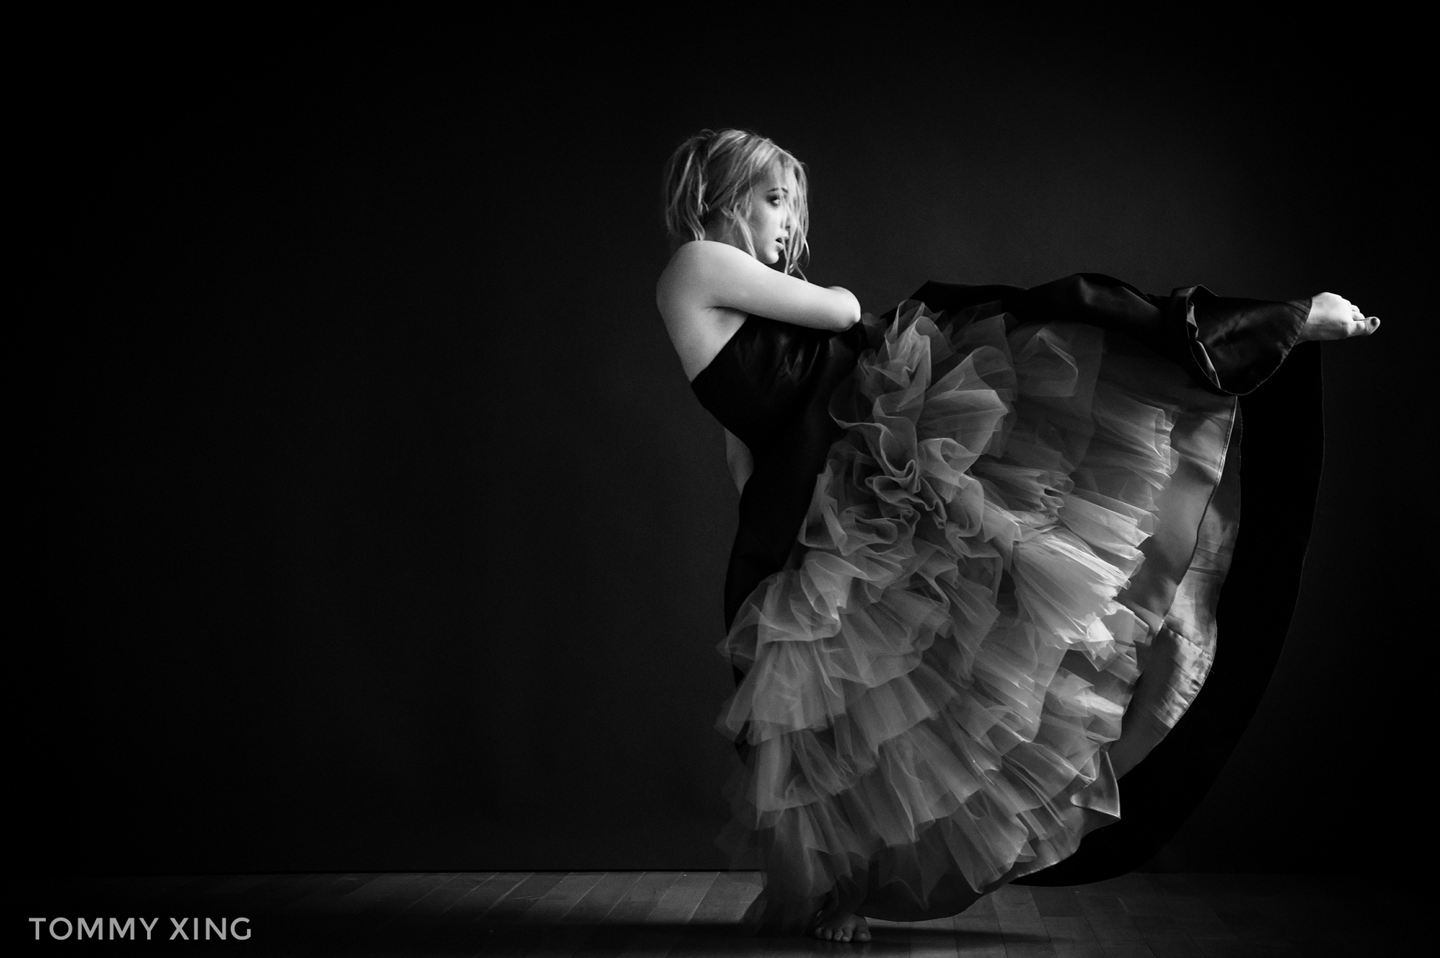 Los Angeles Dance photography - Haley - Tommy Xing16.JPG